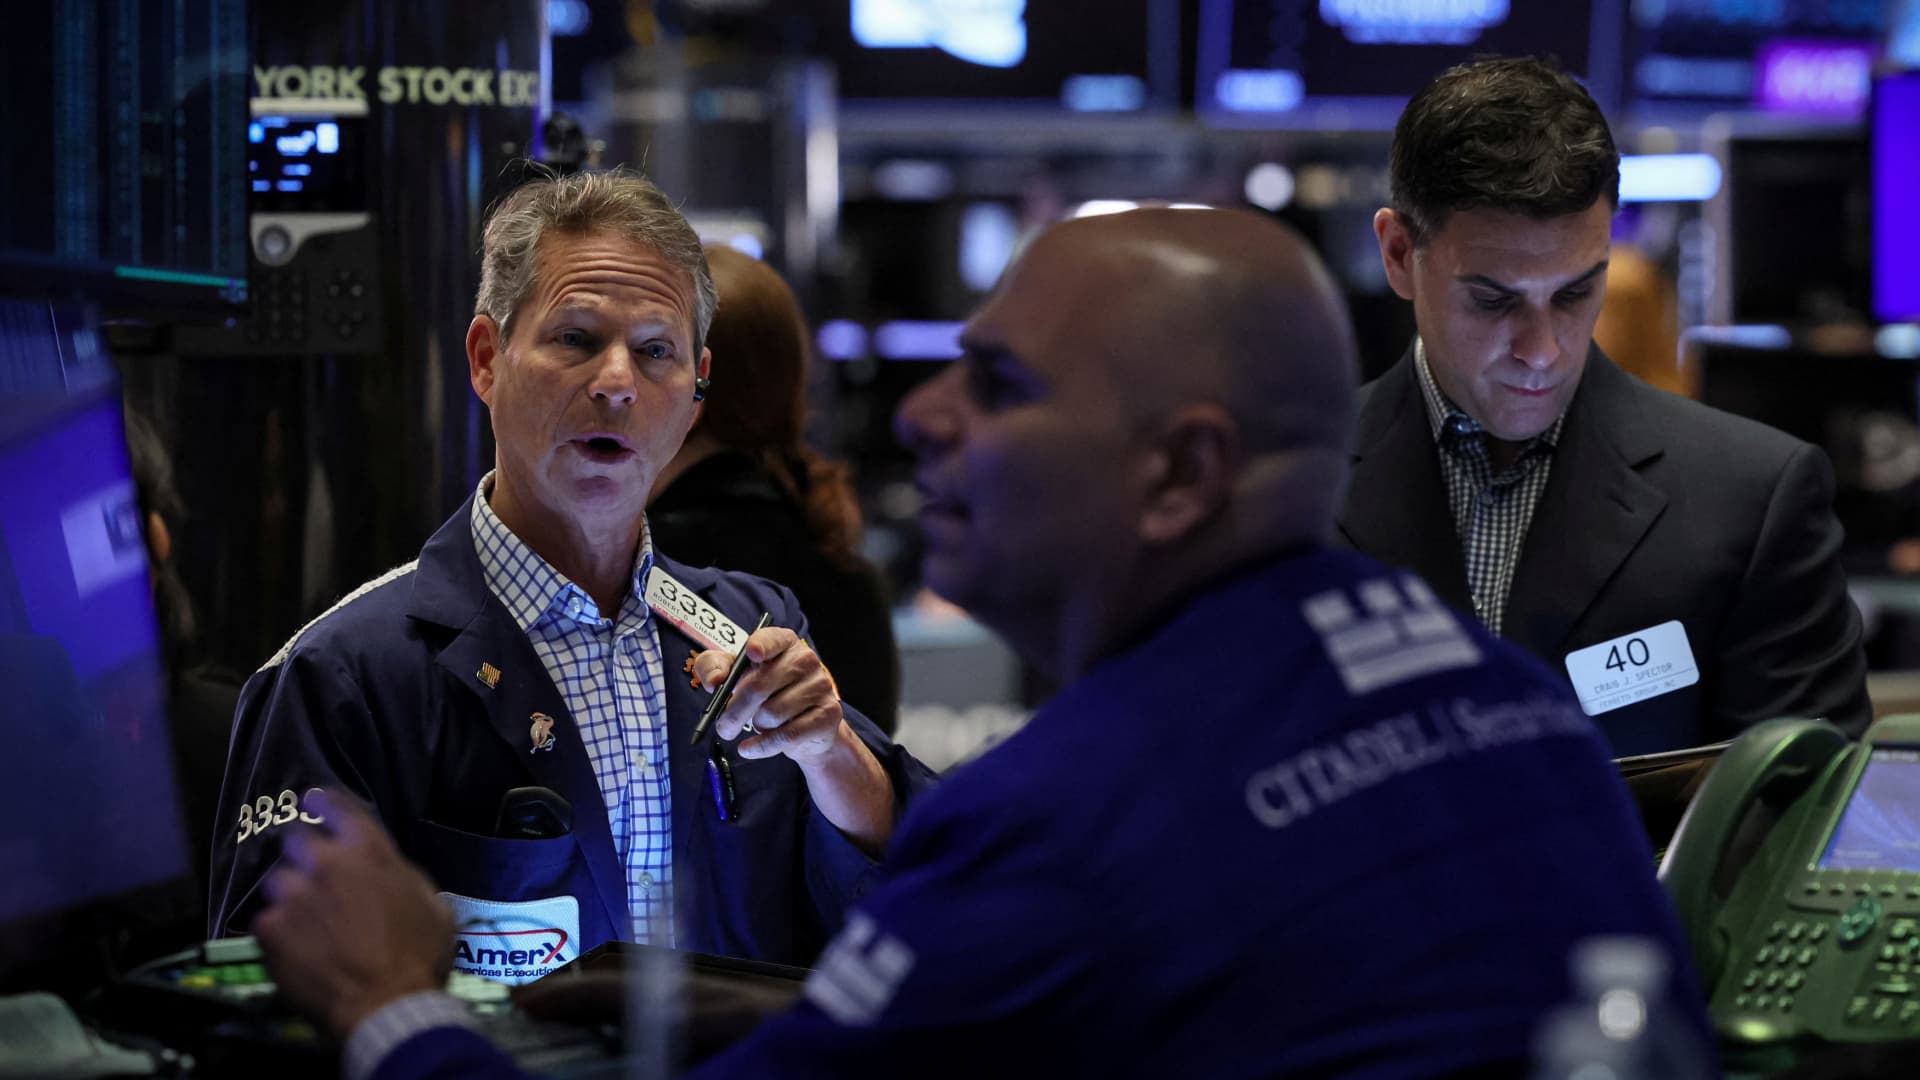 All the market-moving Wall Street chatter from Friday [Video]